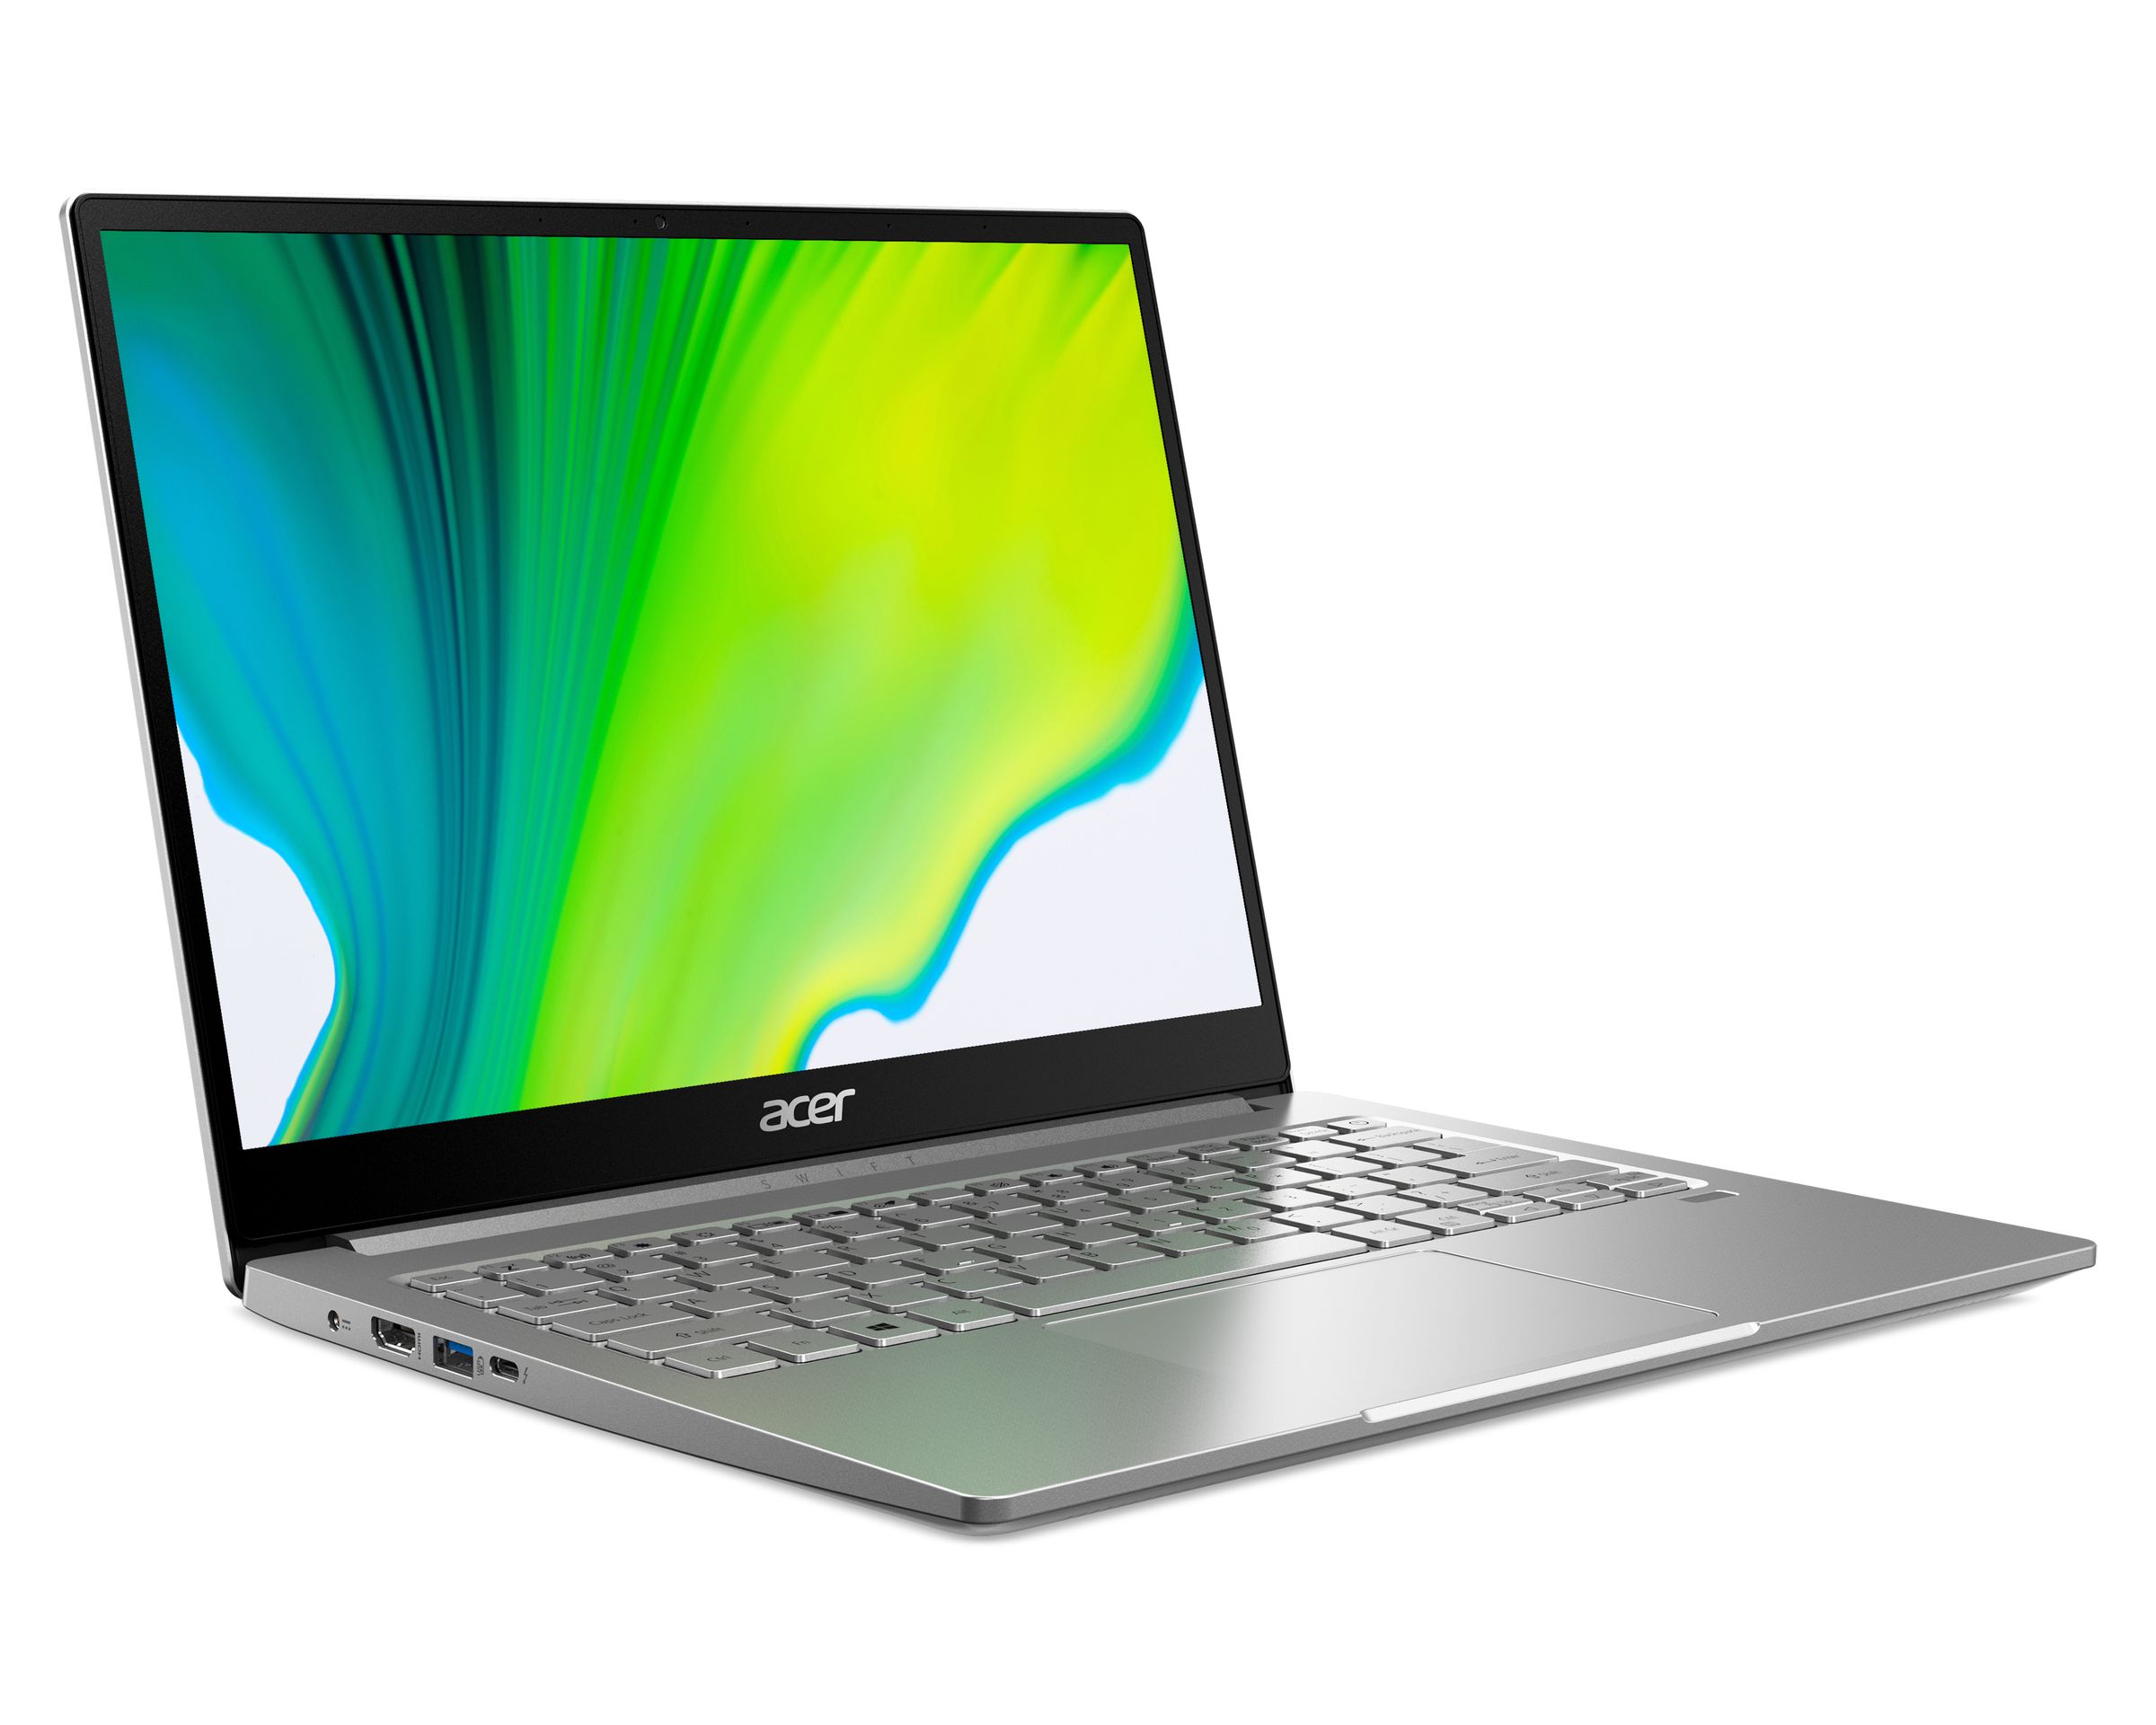 Intel variant of the Acer Swift 3.